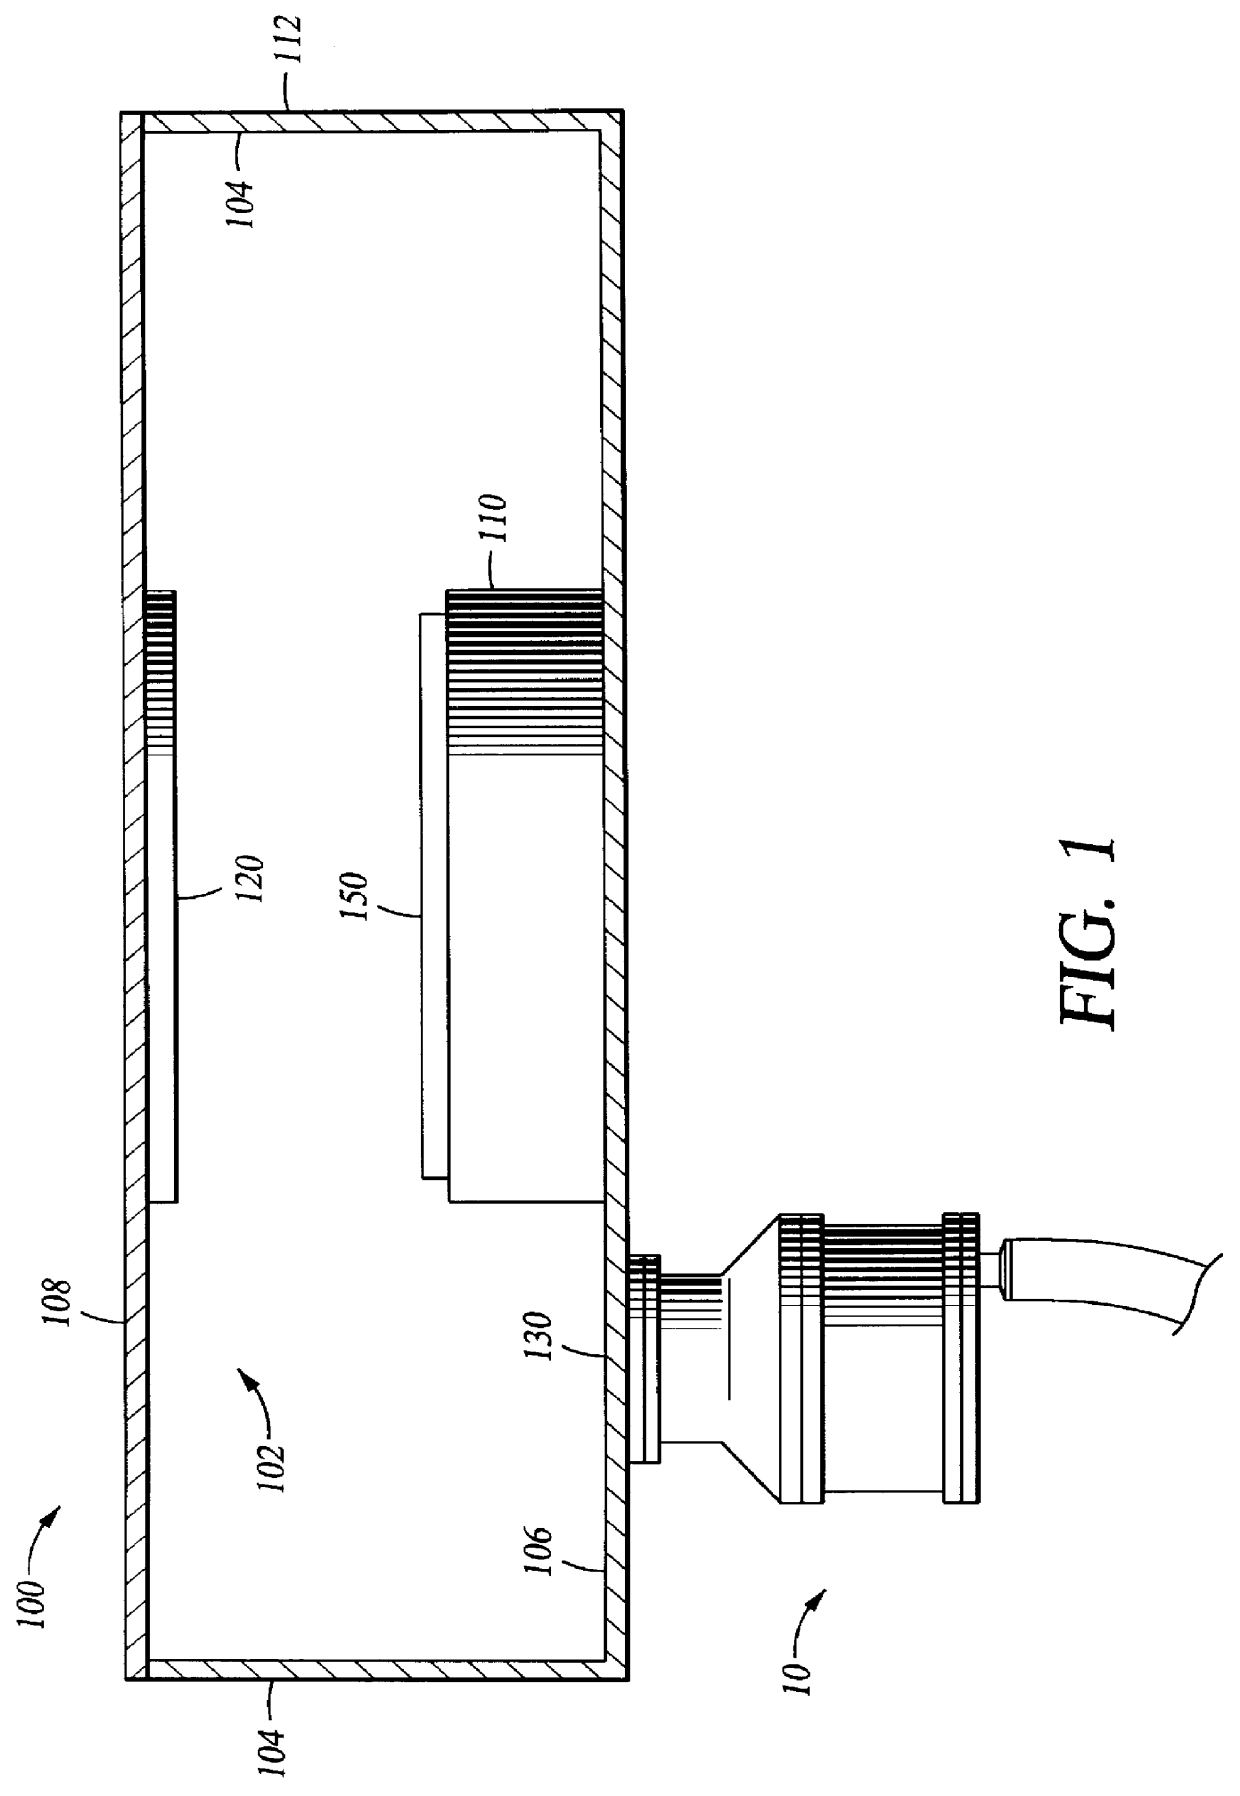 Turbo-Molecular pump with metal matrix composite rotor and stator